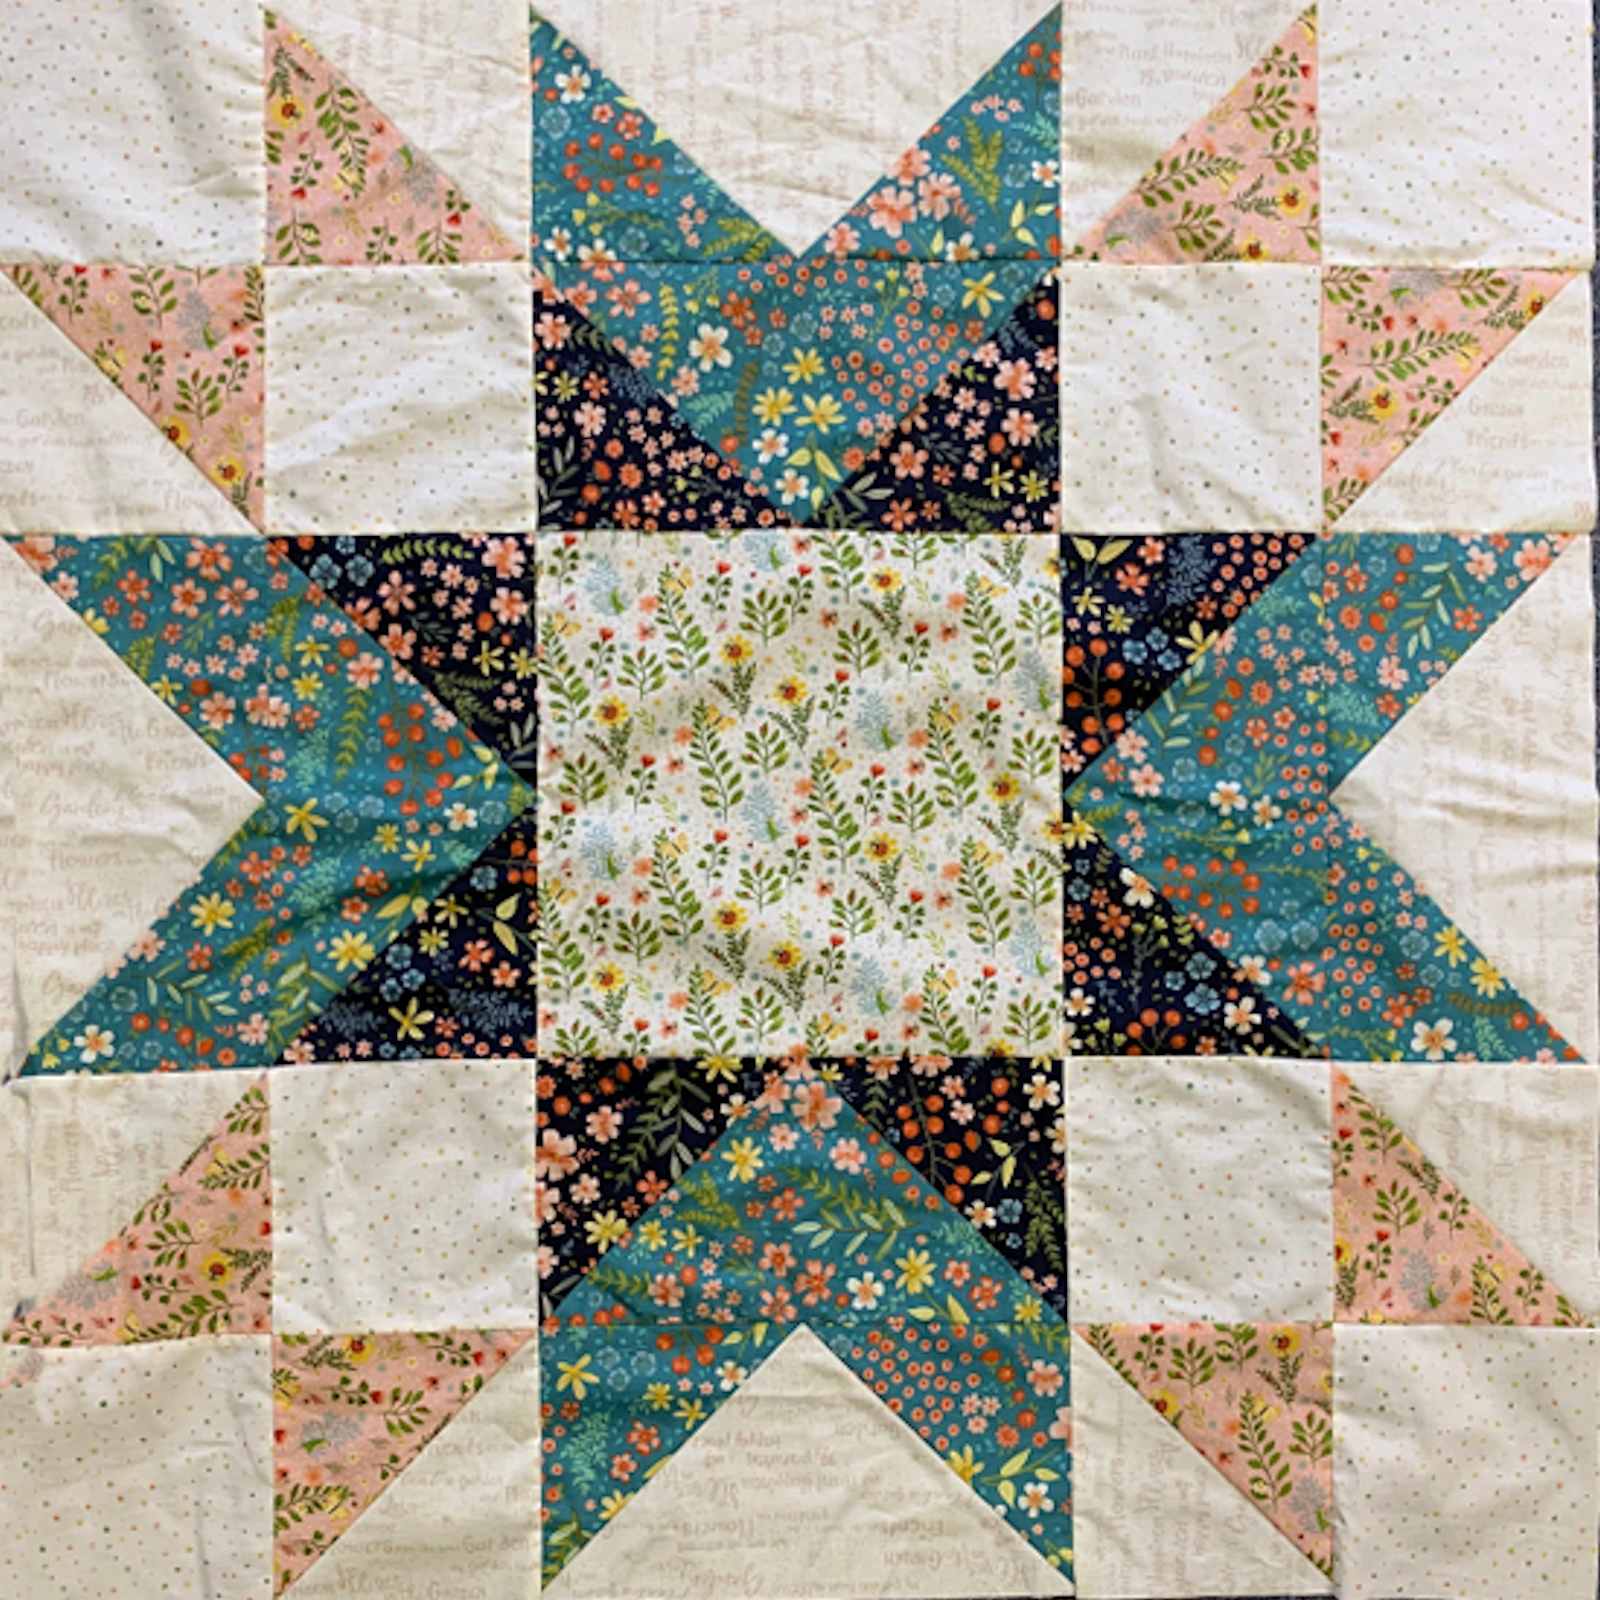 "Amish Star" Quilt Block Made by Jean G.